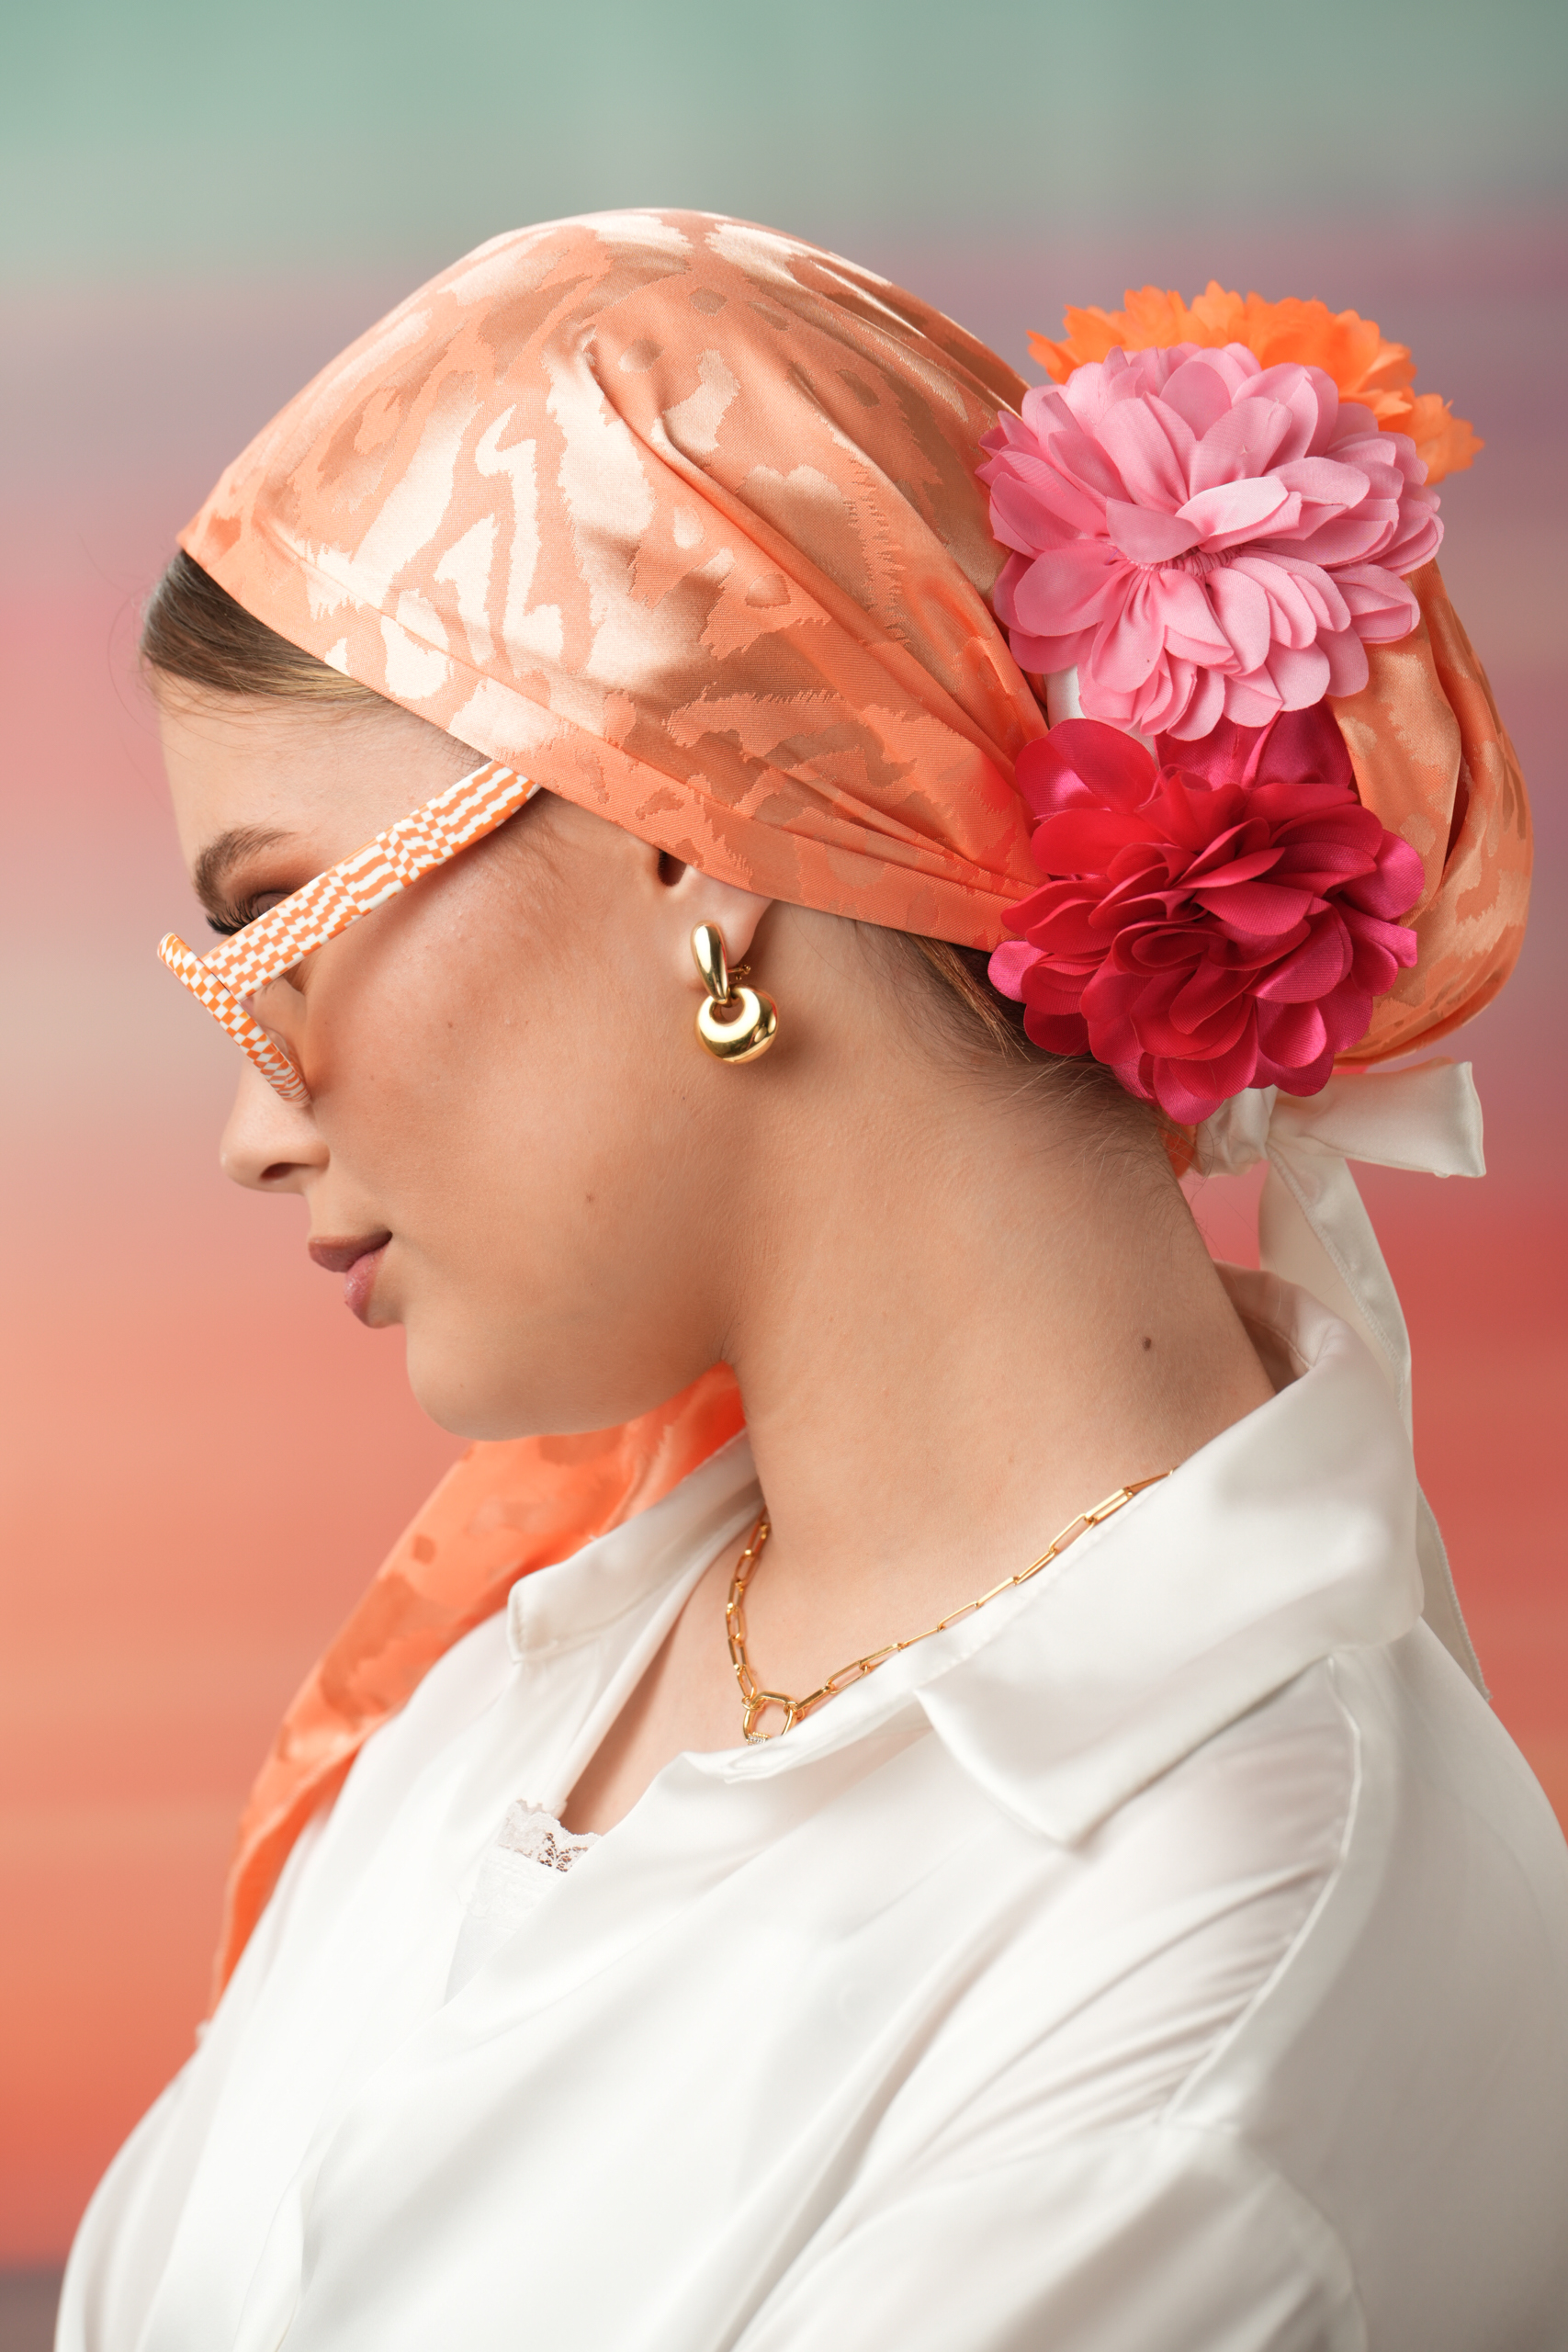 White Headband with pink & orange flowers (headscarf not included)